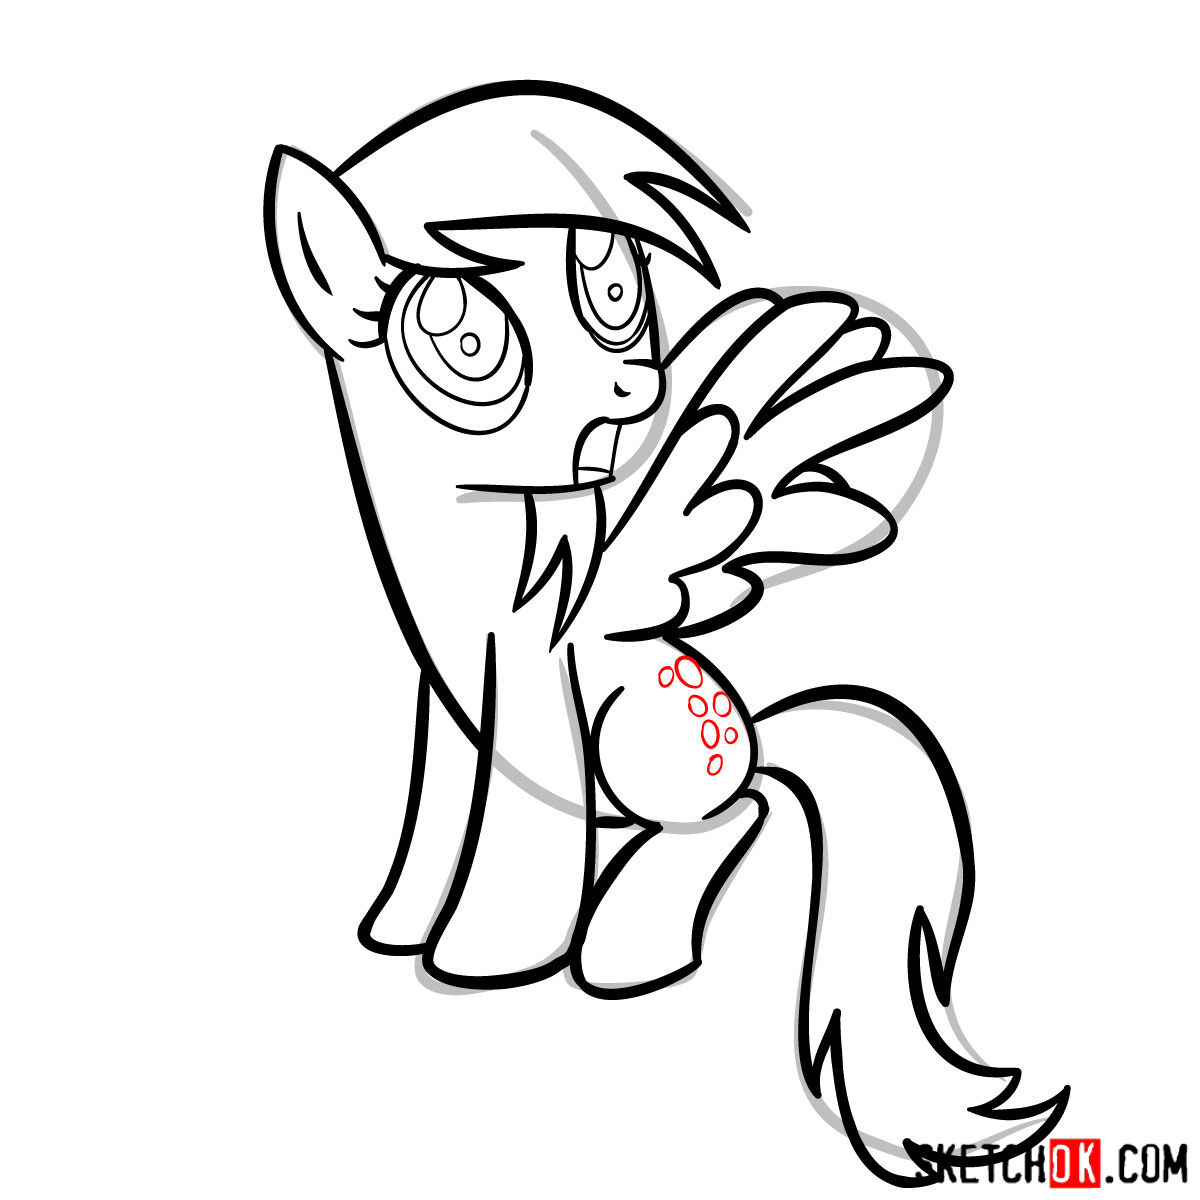 How to draw Derpy Hooves pegasus pony - step 10